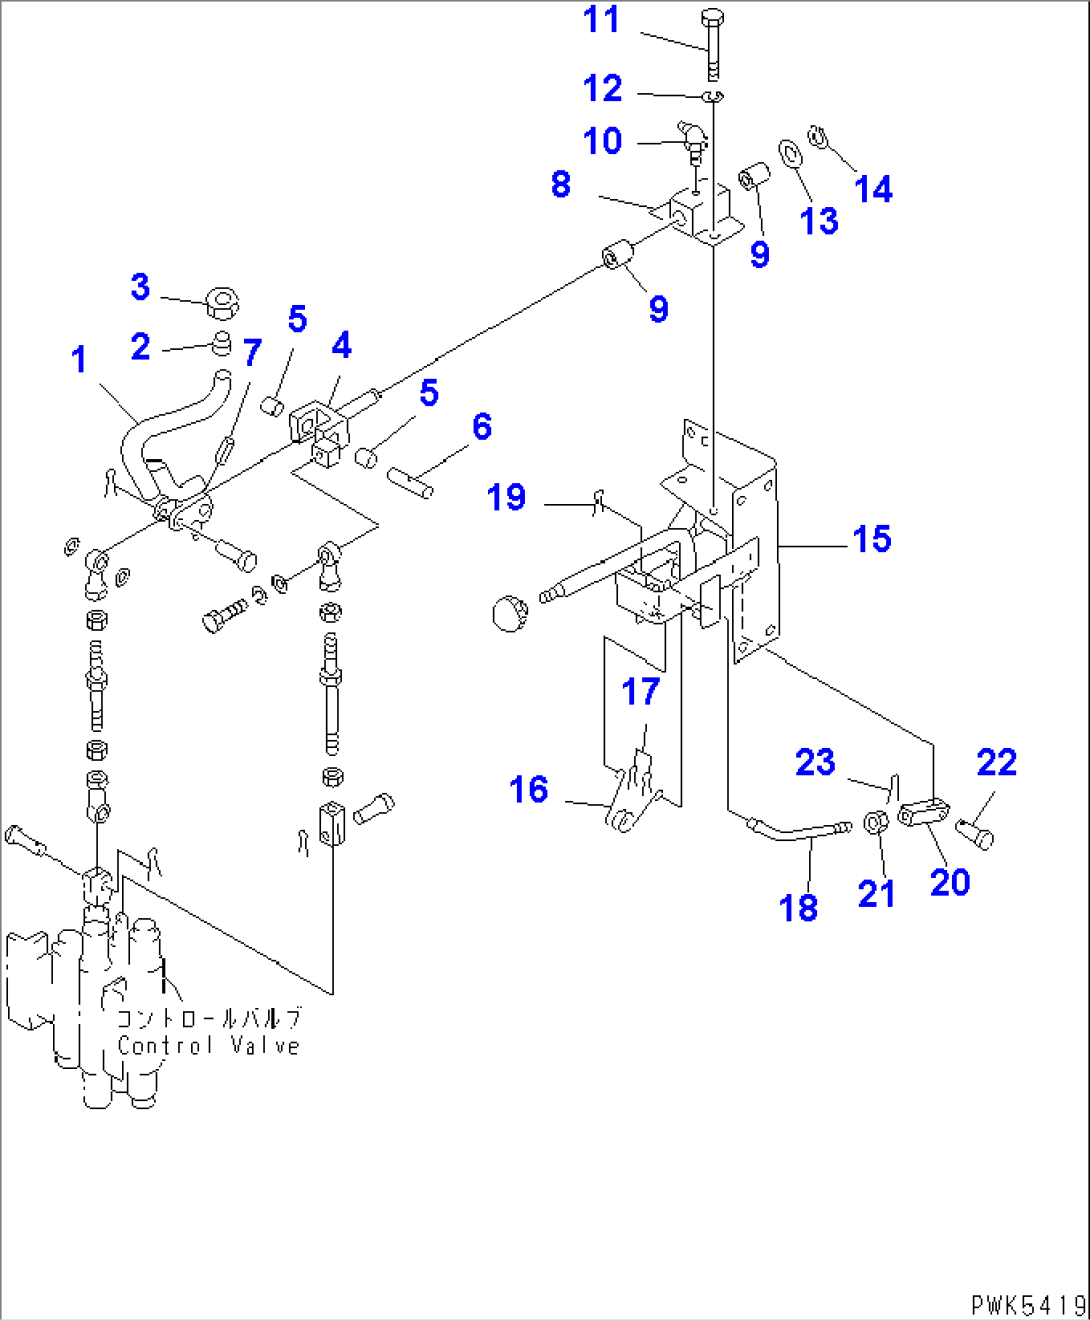 WORK EQUIPMENT CONTROL (LEVER¤ 1/2) (FOR ANGLE DOZER)